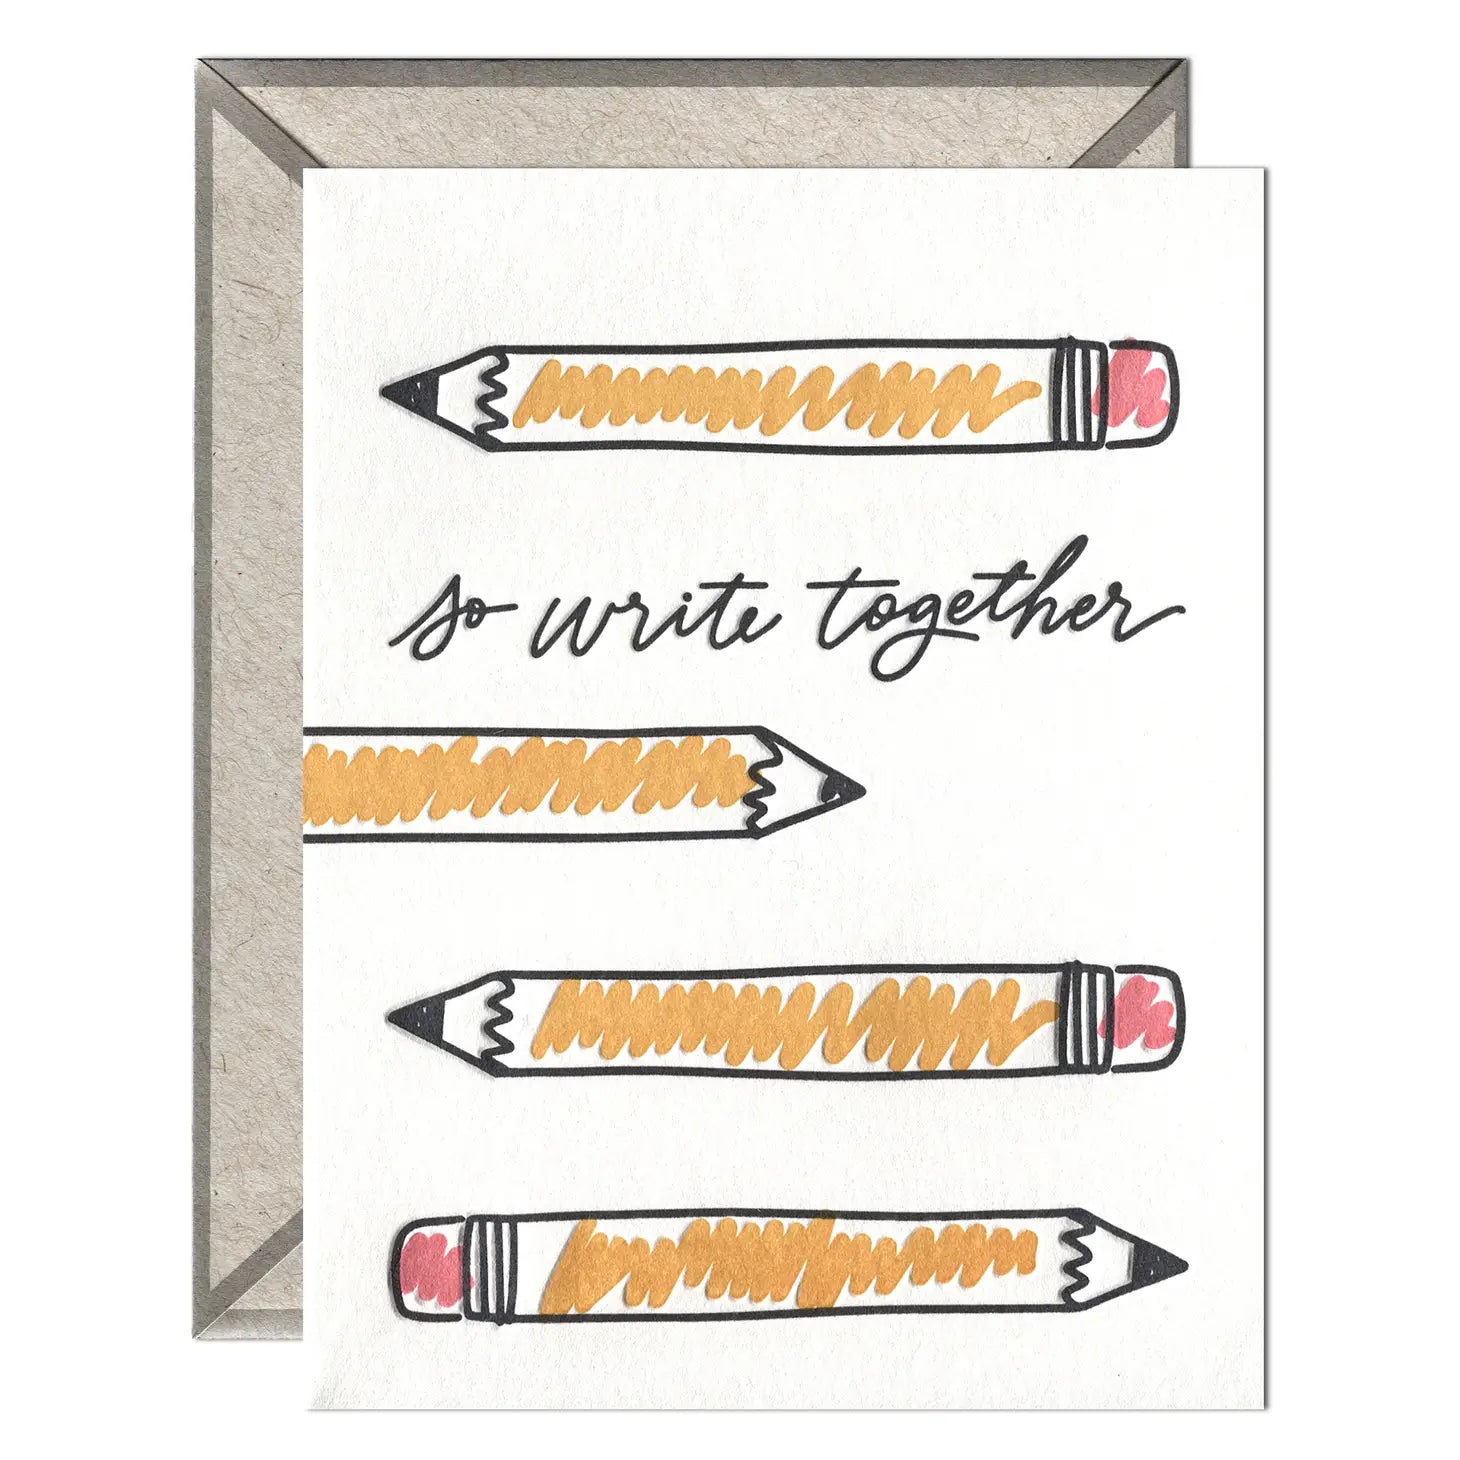 Ink Meets Paper Greeting Card - So Write Together